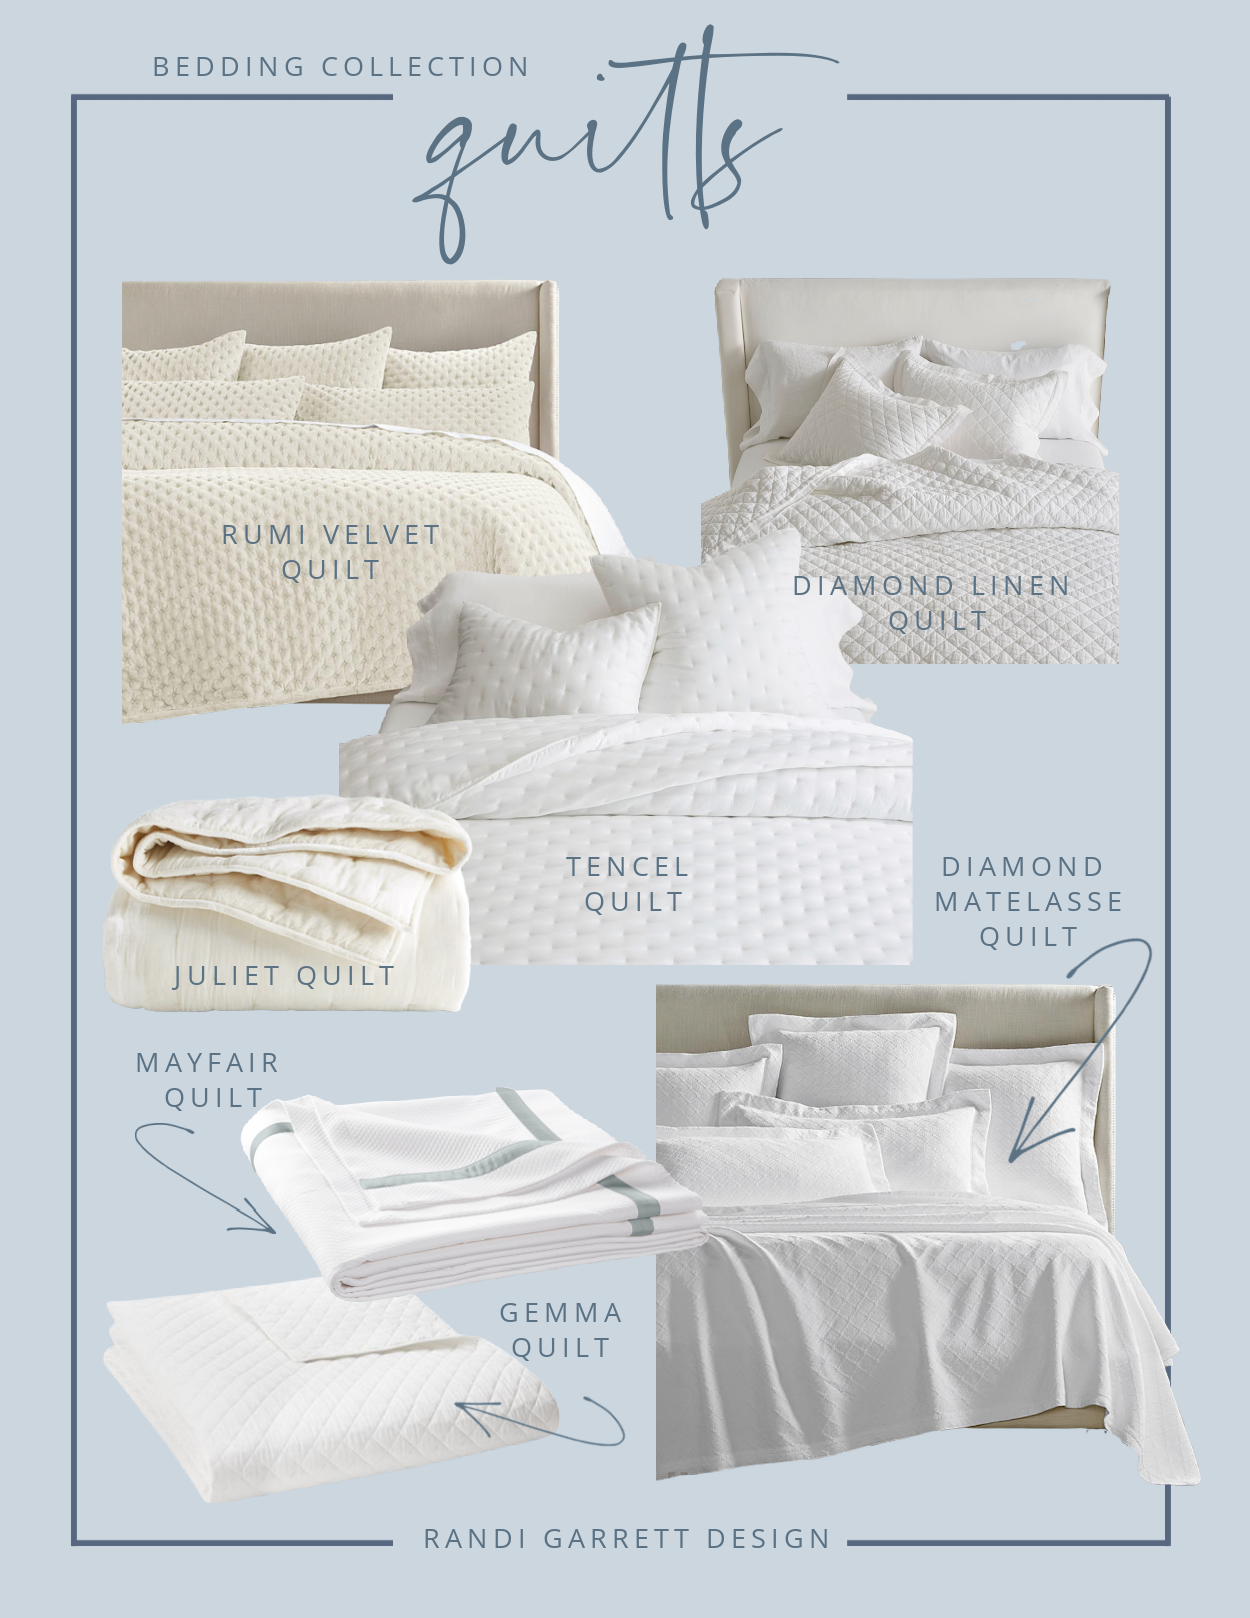 How to Start a Bedding Collection